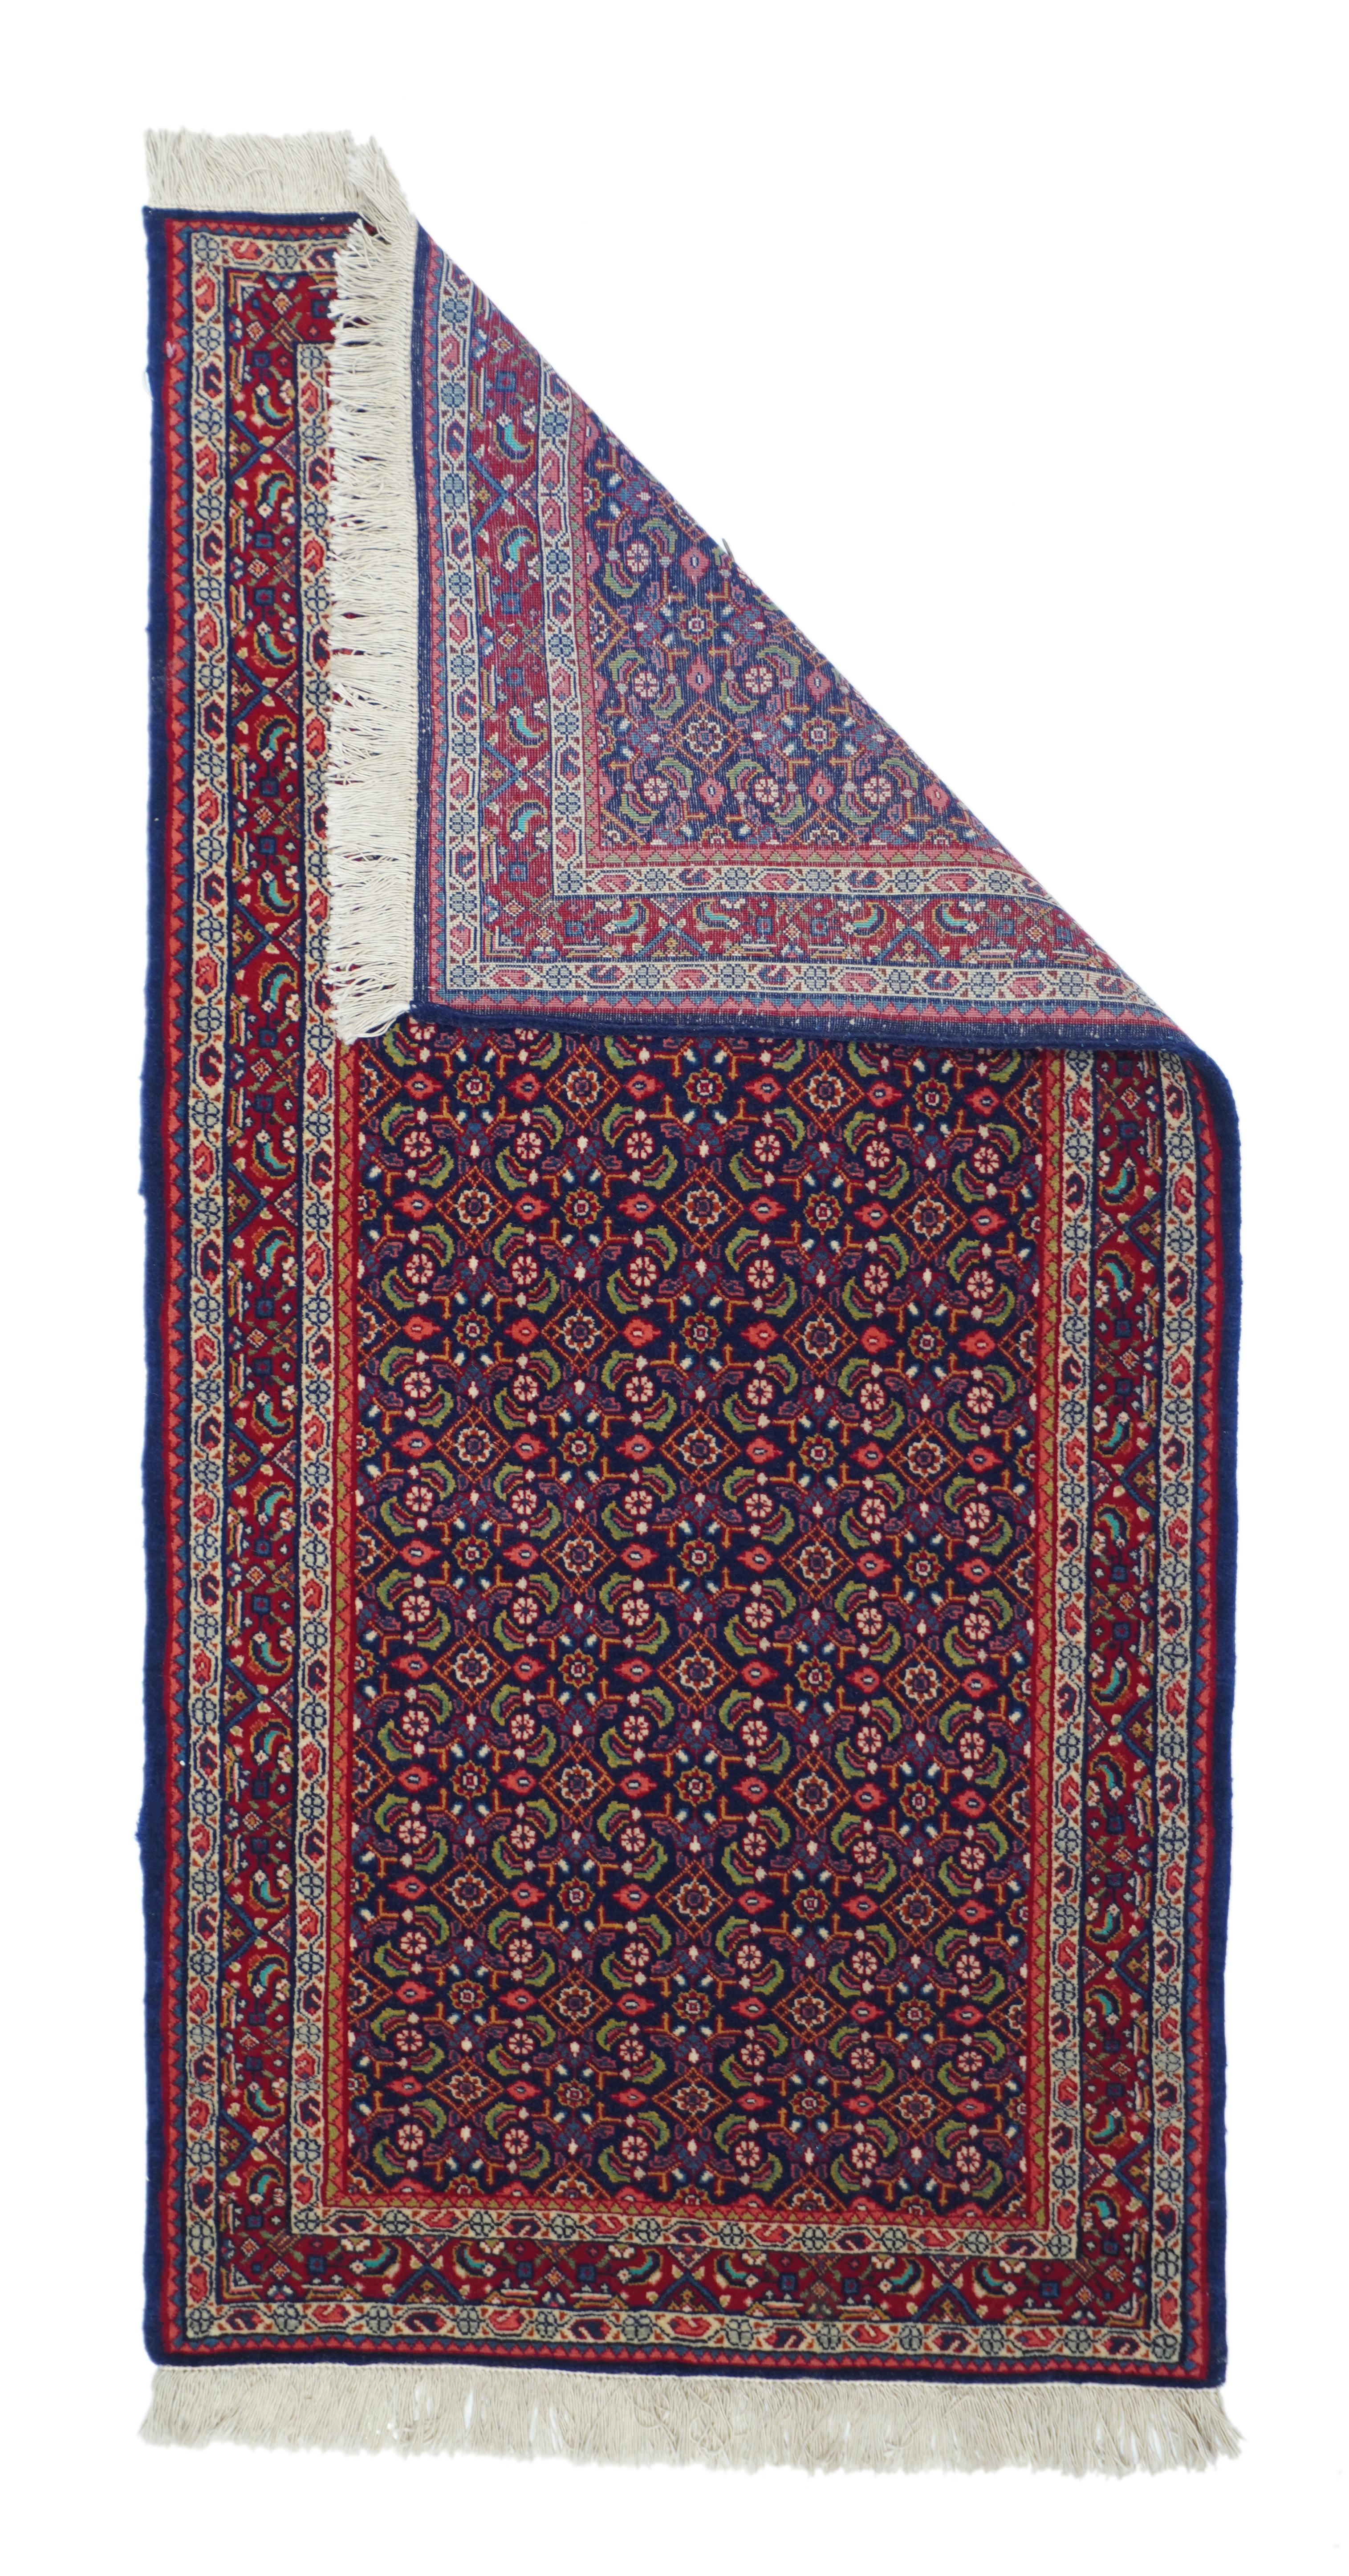 Vintage Sarouk rug 2'3'' x 4'5''. The very dark navy field hosts a close and even allover Herati design with ivory rosettes, open diamonds and fat, short curled leaves. Red border with boteh-